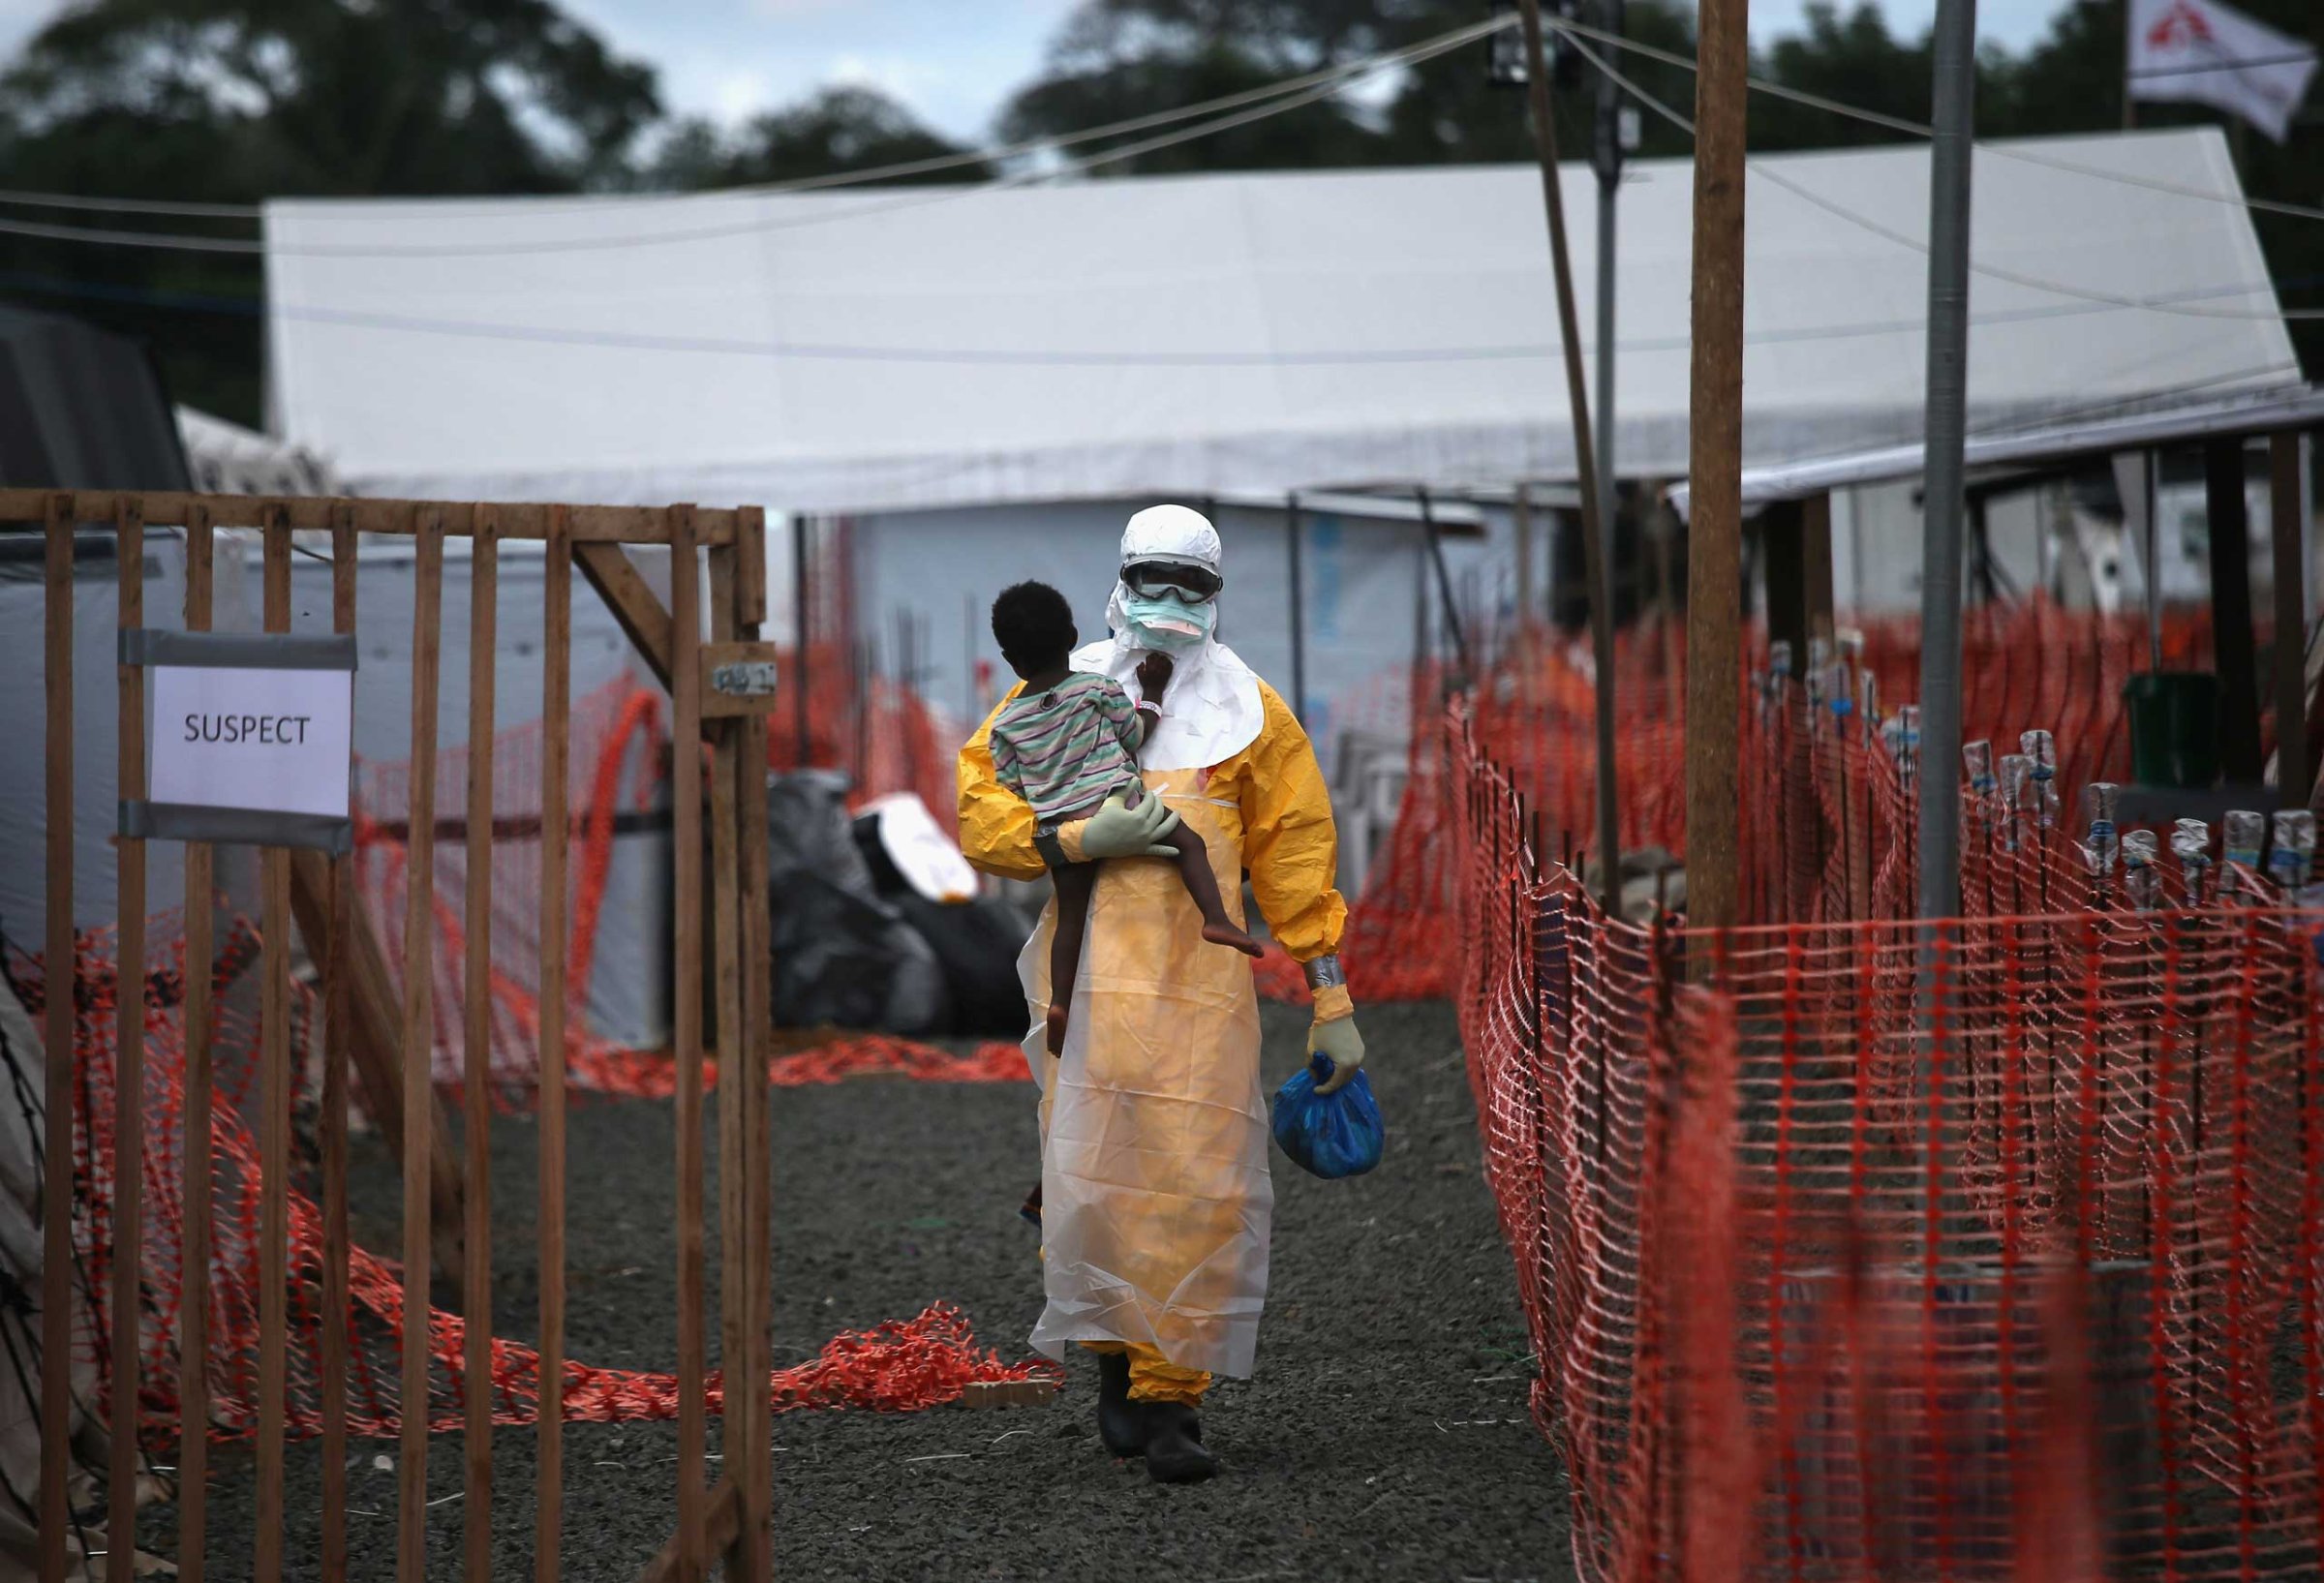 A Doctors Without Borders (MSF), health worker in protective clothing carries a child suspected of having Ebola in the MSF treatment center on Oct. 5, 2014 in Paynesville, Liberia.